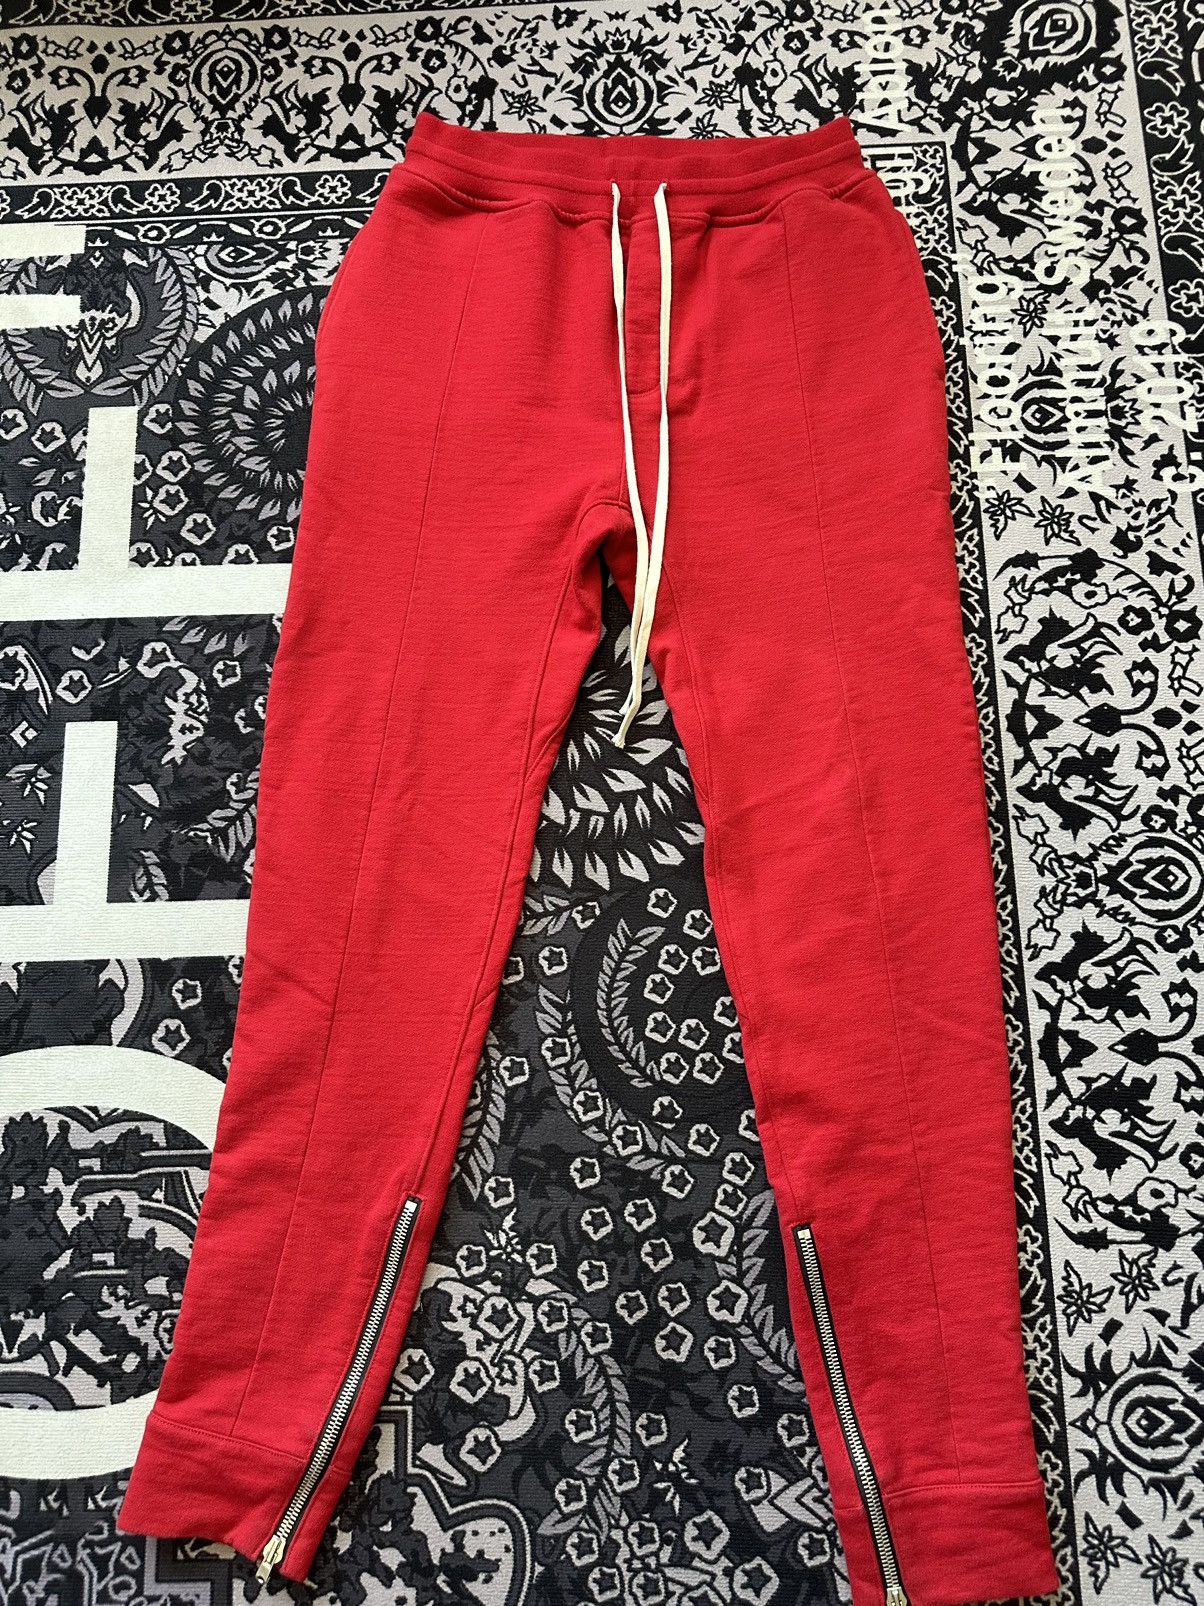 Fear of God Fear of God Fifth Collection Sweatpants sz M | Grailed